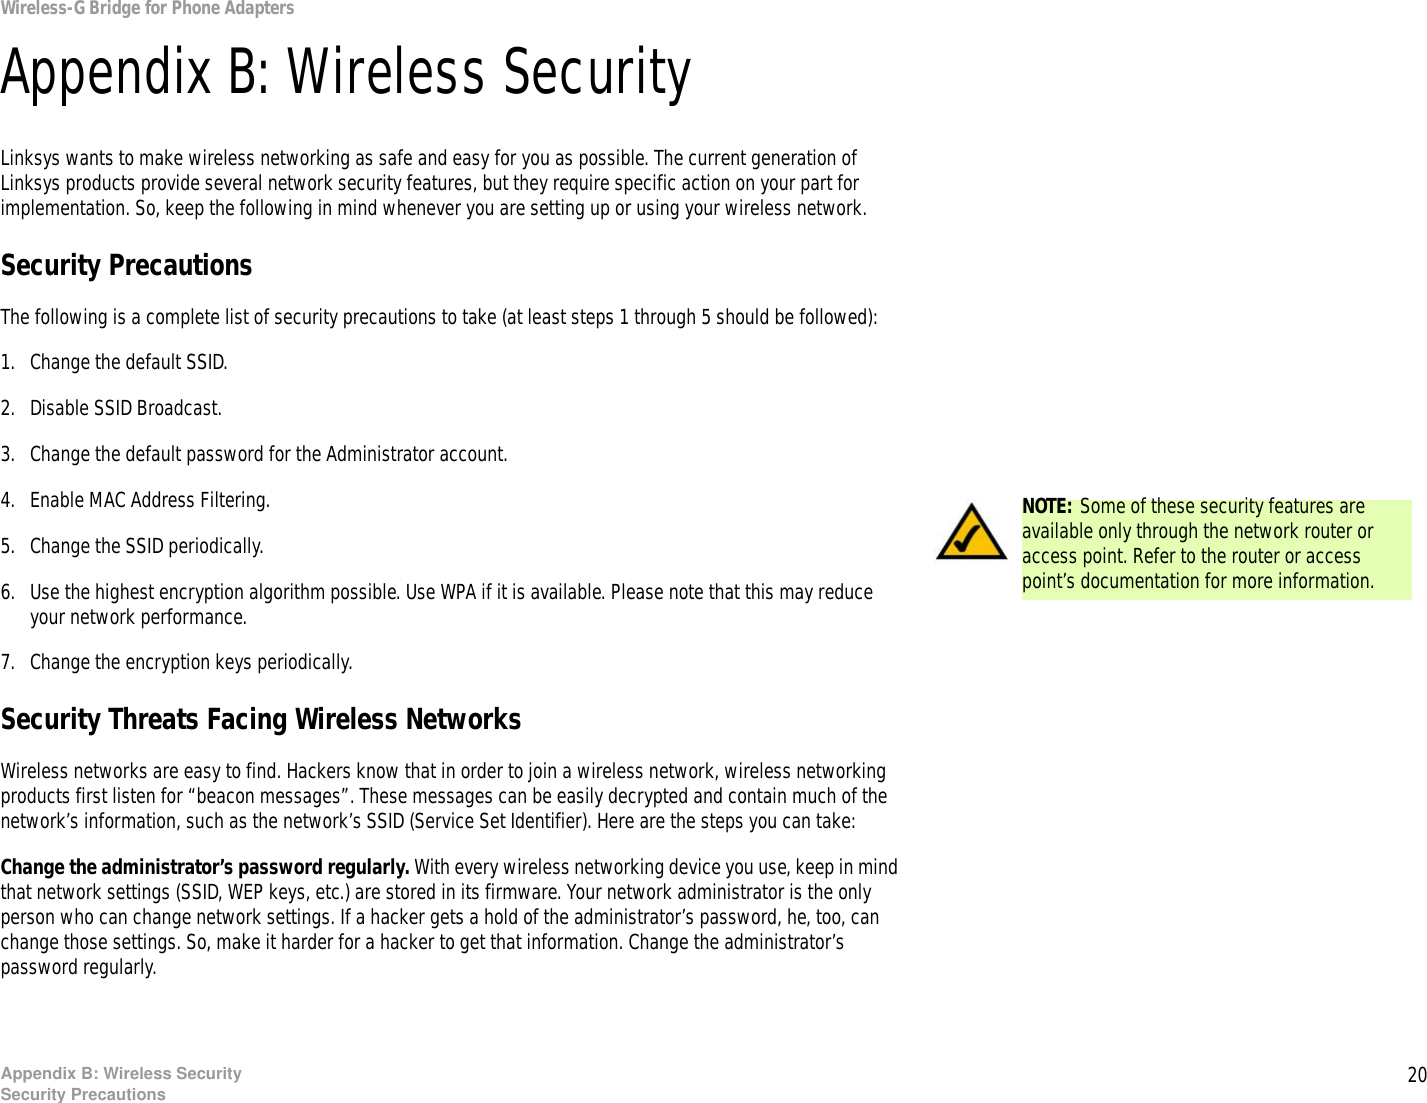 20Appendix B: Wireless SecuritySecurity PrecautionsWireless-G Bridge for Phone AdaptersAppendix B: Wireless SecurityLinksys wants to make wireless networking as safe and easy for you as possible. The current generation of Linksys products provide several network security features, but they require specific action on your part for implementation. So, keep the following in mind whenever you are setting up or using your wireless network.Security PrecautionsThe following is a complete list of security precautions to take (at least steps 1 through 5 should be followed):1. Change the default SSID. 2. Disable SSID Broadcast. 3. Change the default password for the Administrator account. 4. Enable MAC Address Filtering. 5. Change the SSID periodically. 6. Use the highest encryption algorithm possible. Use WPA if it is available. Please note that this may reduce your network performance. 7. Change the encryption keys periodically. Security Threats Facing Wireless Networks Wireless networks are easy to find. Hackers know that in order to join a wireless network, wireless networking products first listen for “beacon messages”. These messages can be easily decrypted and contain much of the network’s information, such as the network’s SSID (Service Set Identifier). Here are the steps you can take:Change the administrator’s password regularly. With every wireless networking device you use, keep in mind that network settings (SSID, WEP keys, etc.) are stored in its firmware. Your network administrator is the only person who can change network settings. If a hacker gets a hold of the administrator’s password, he, too, can change those settings. So, make it harder for a hacker to get that information. Change the administrator’s password regularly.NOTE: Some of these security features are available only through the network router or access point. Refer to the router or access point’s documentation for more information.